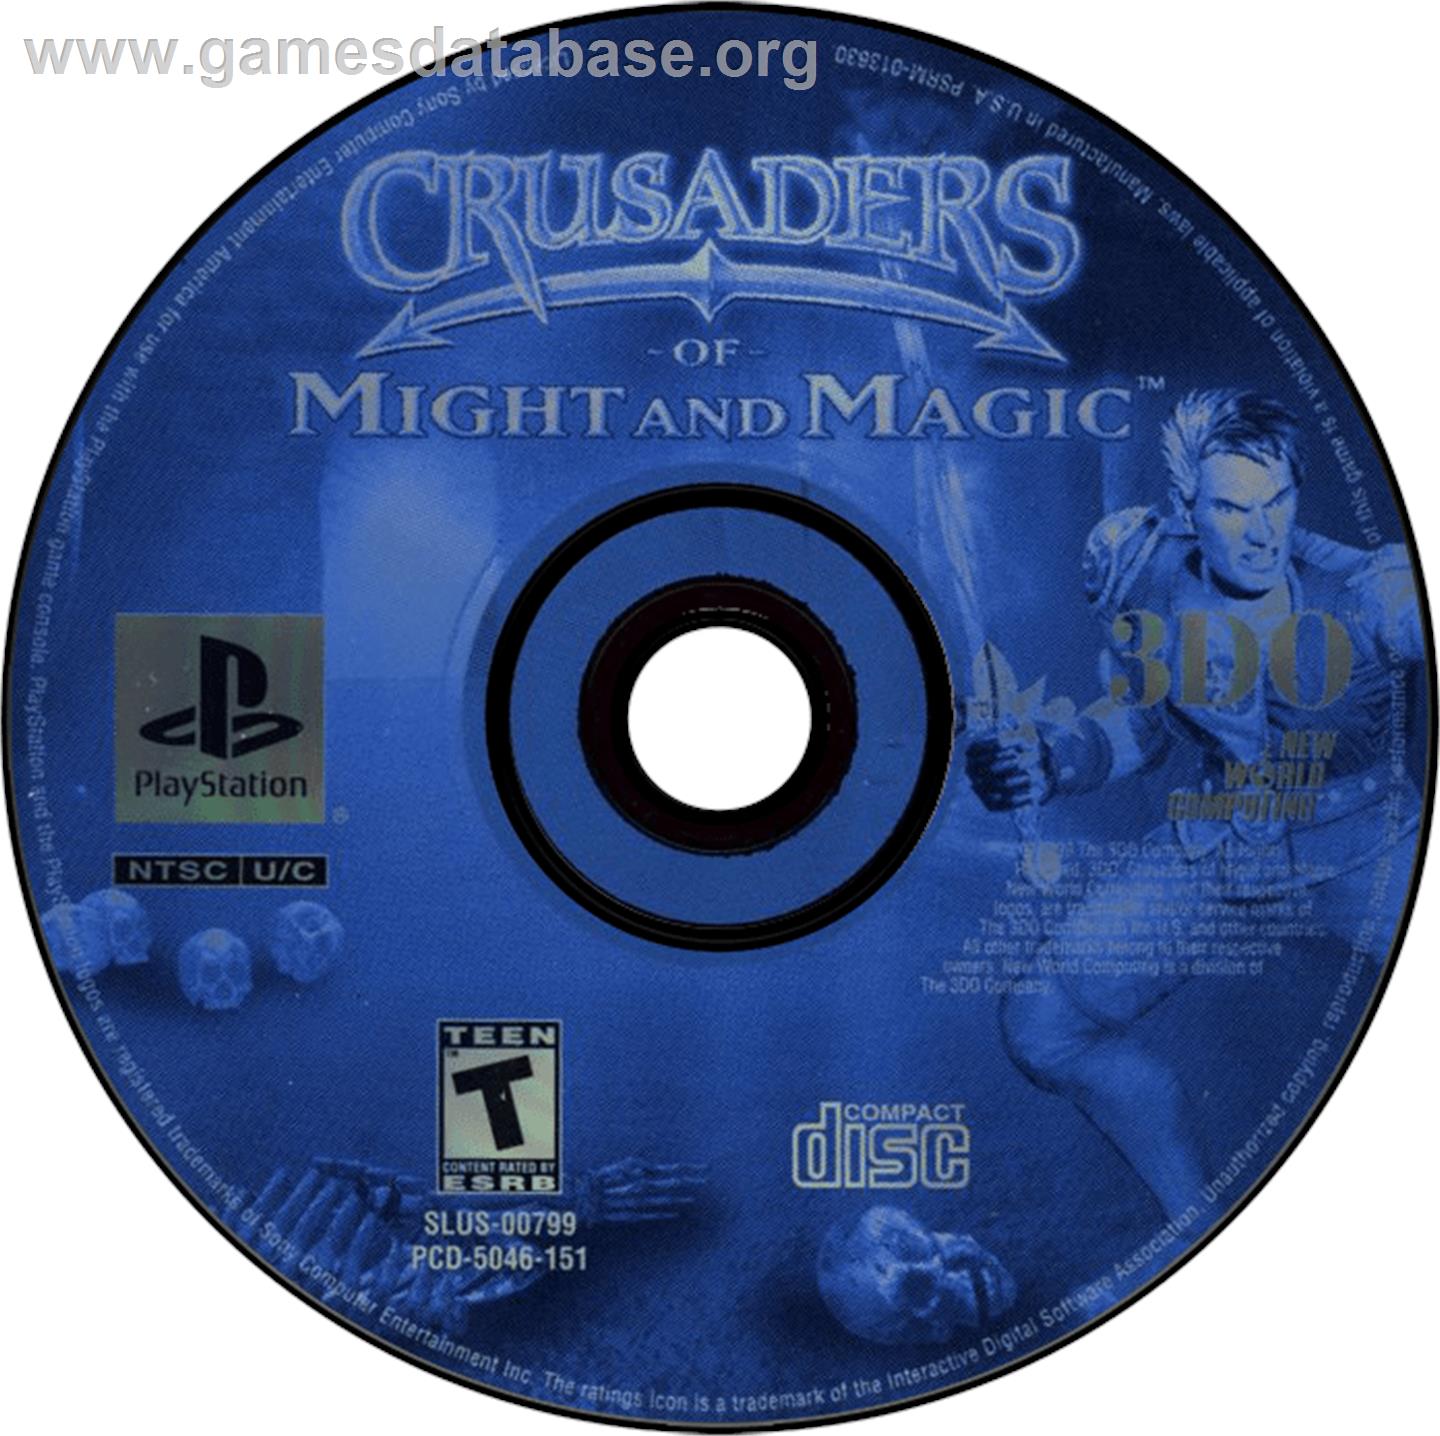 Crusaders of Might and Magic - Sony Playstation - Artwork - Disc